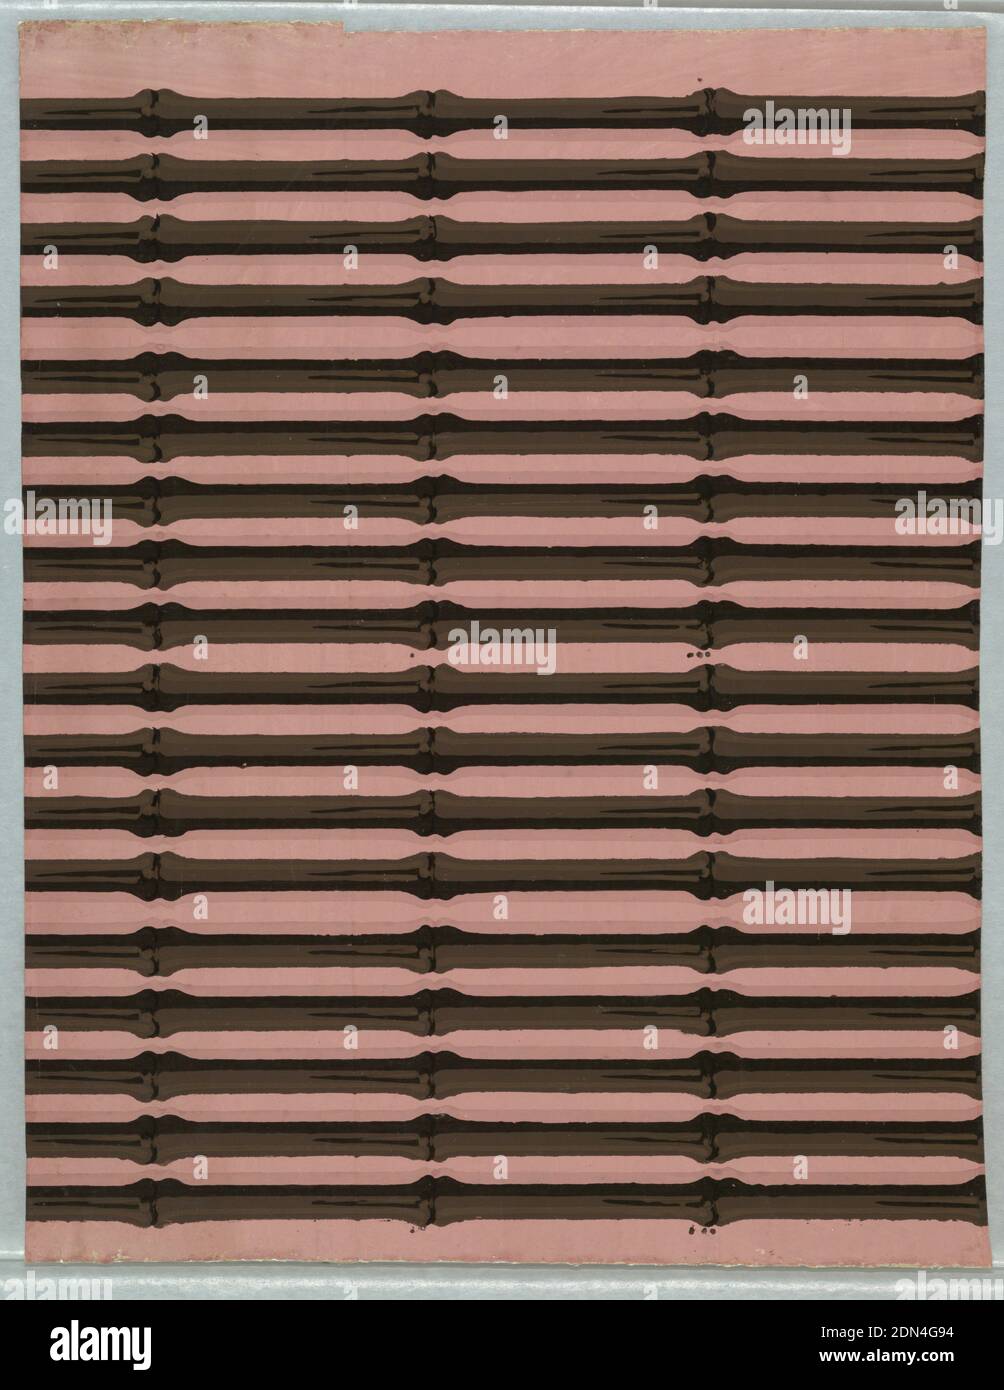 Borders, Block-printed on handmade paper, Black parallel bamboo strips on pink ground. Two borders to a width. Shading of strips changes direction approximately half way across each border., England, 1820–22, Wallcoverings, Borders Stock Photo